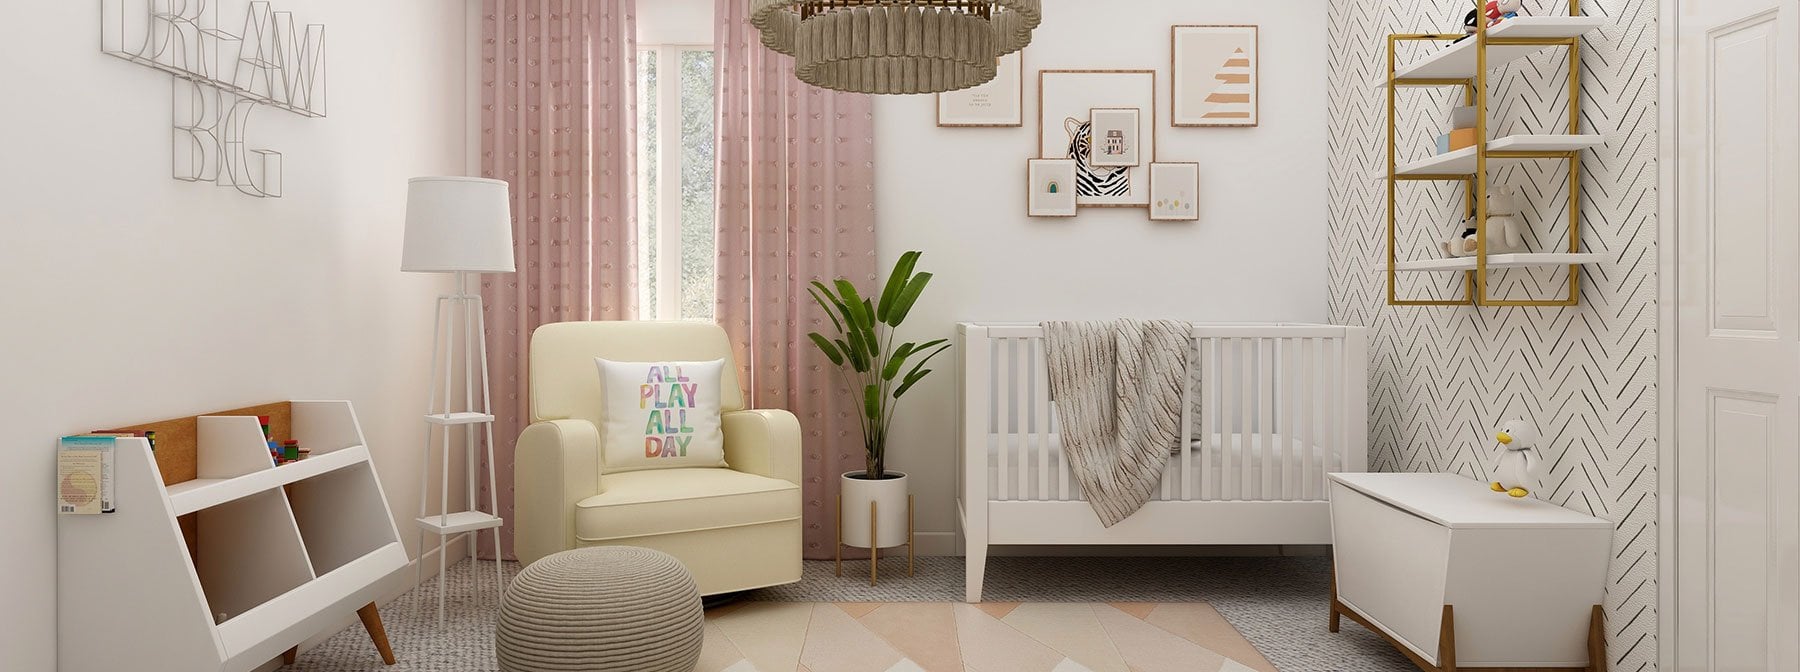 Nursery Storage Ideas for Small Rooms